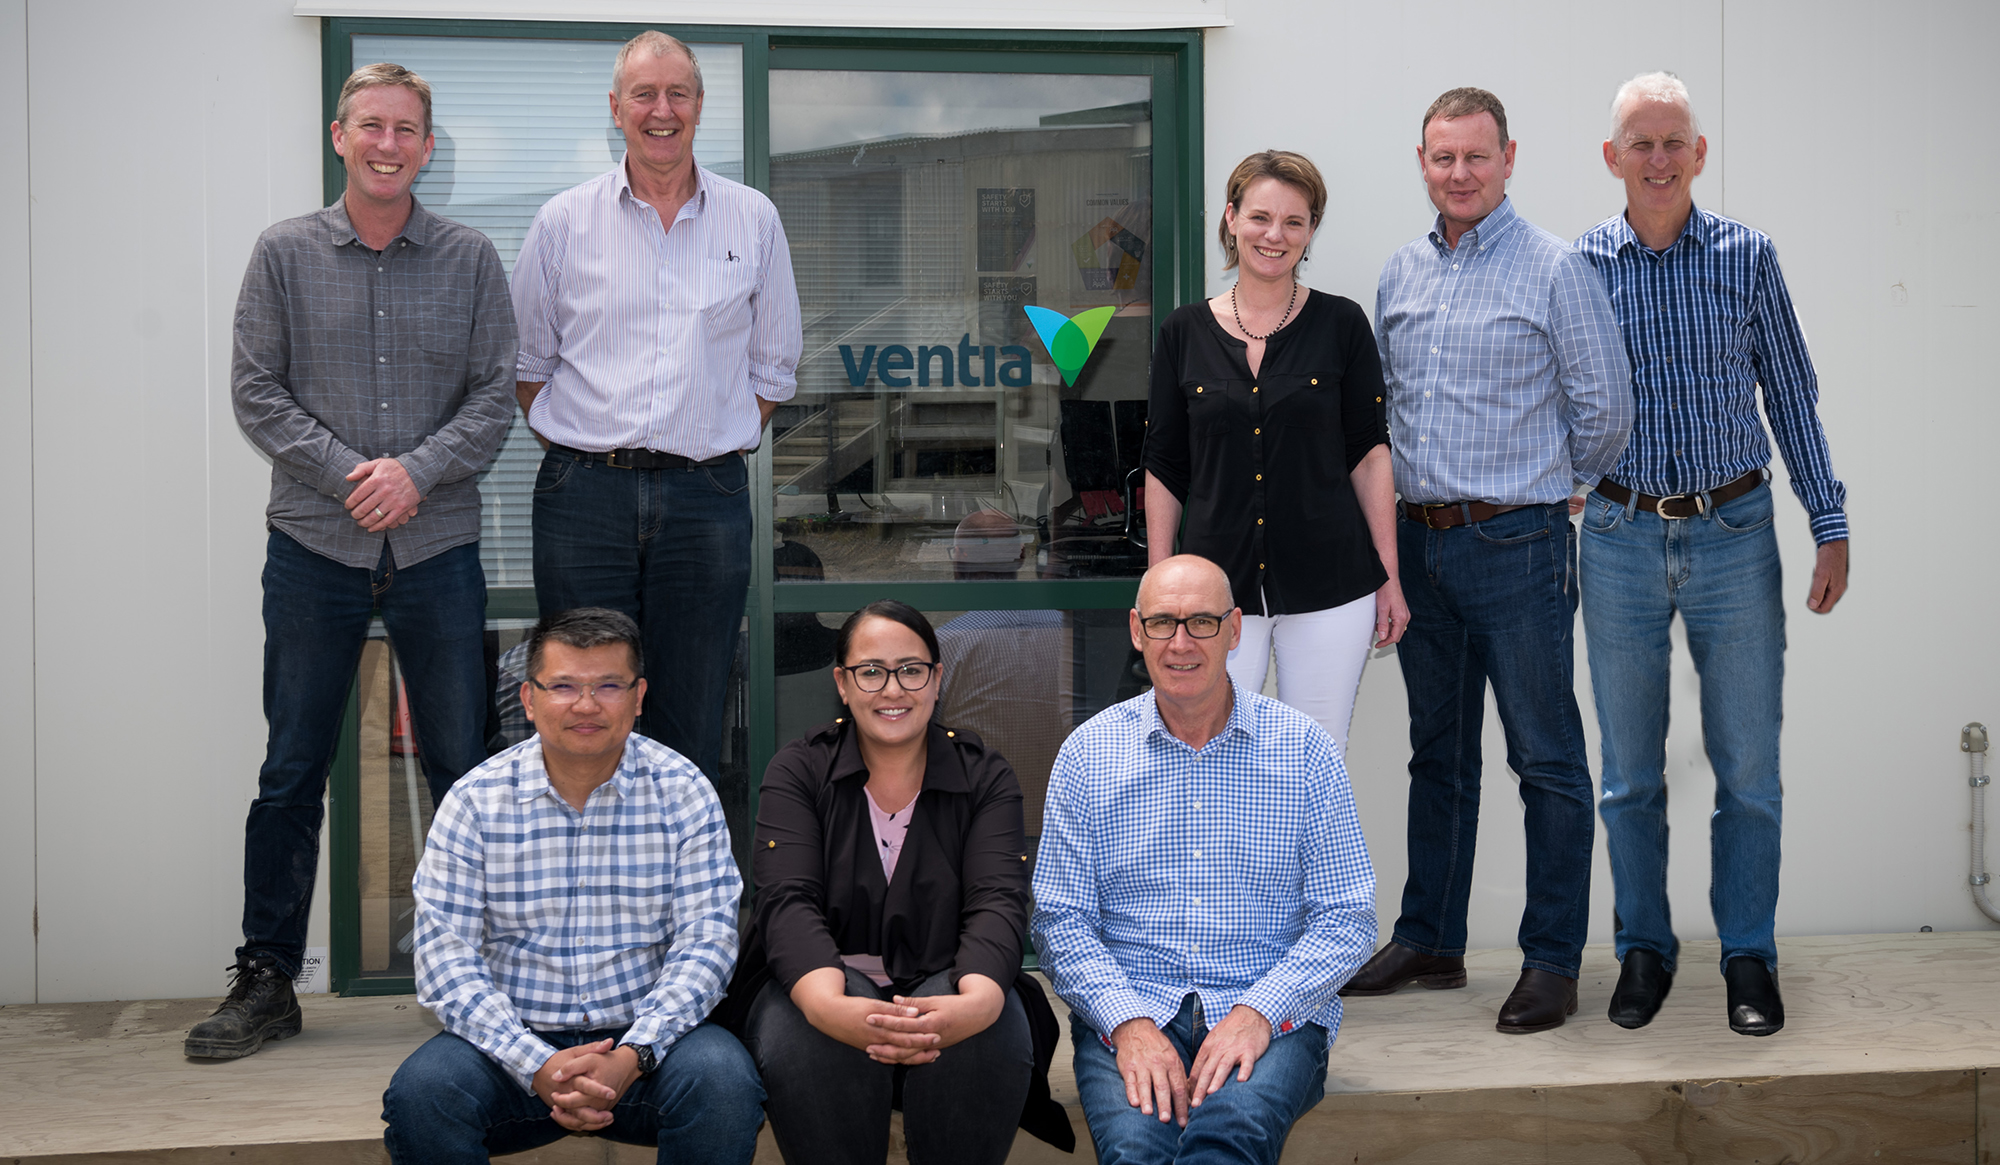 Eight members of the Ventia team standing in front of their project office with the Ventia logo on the glass door.